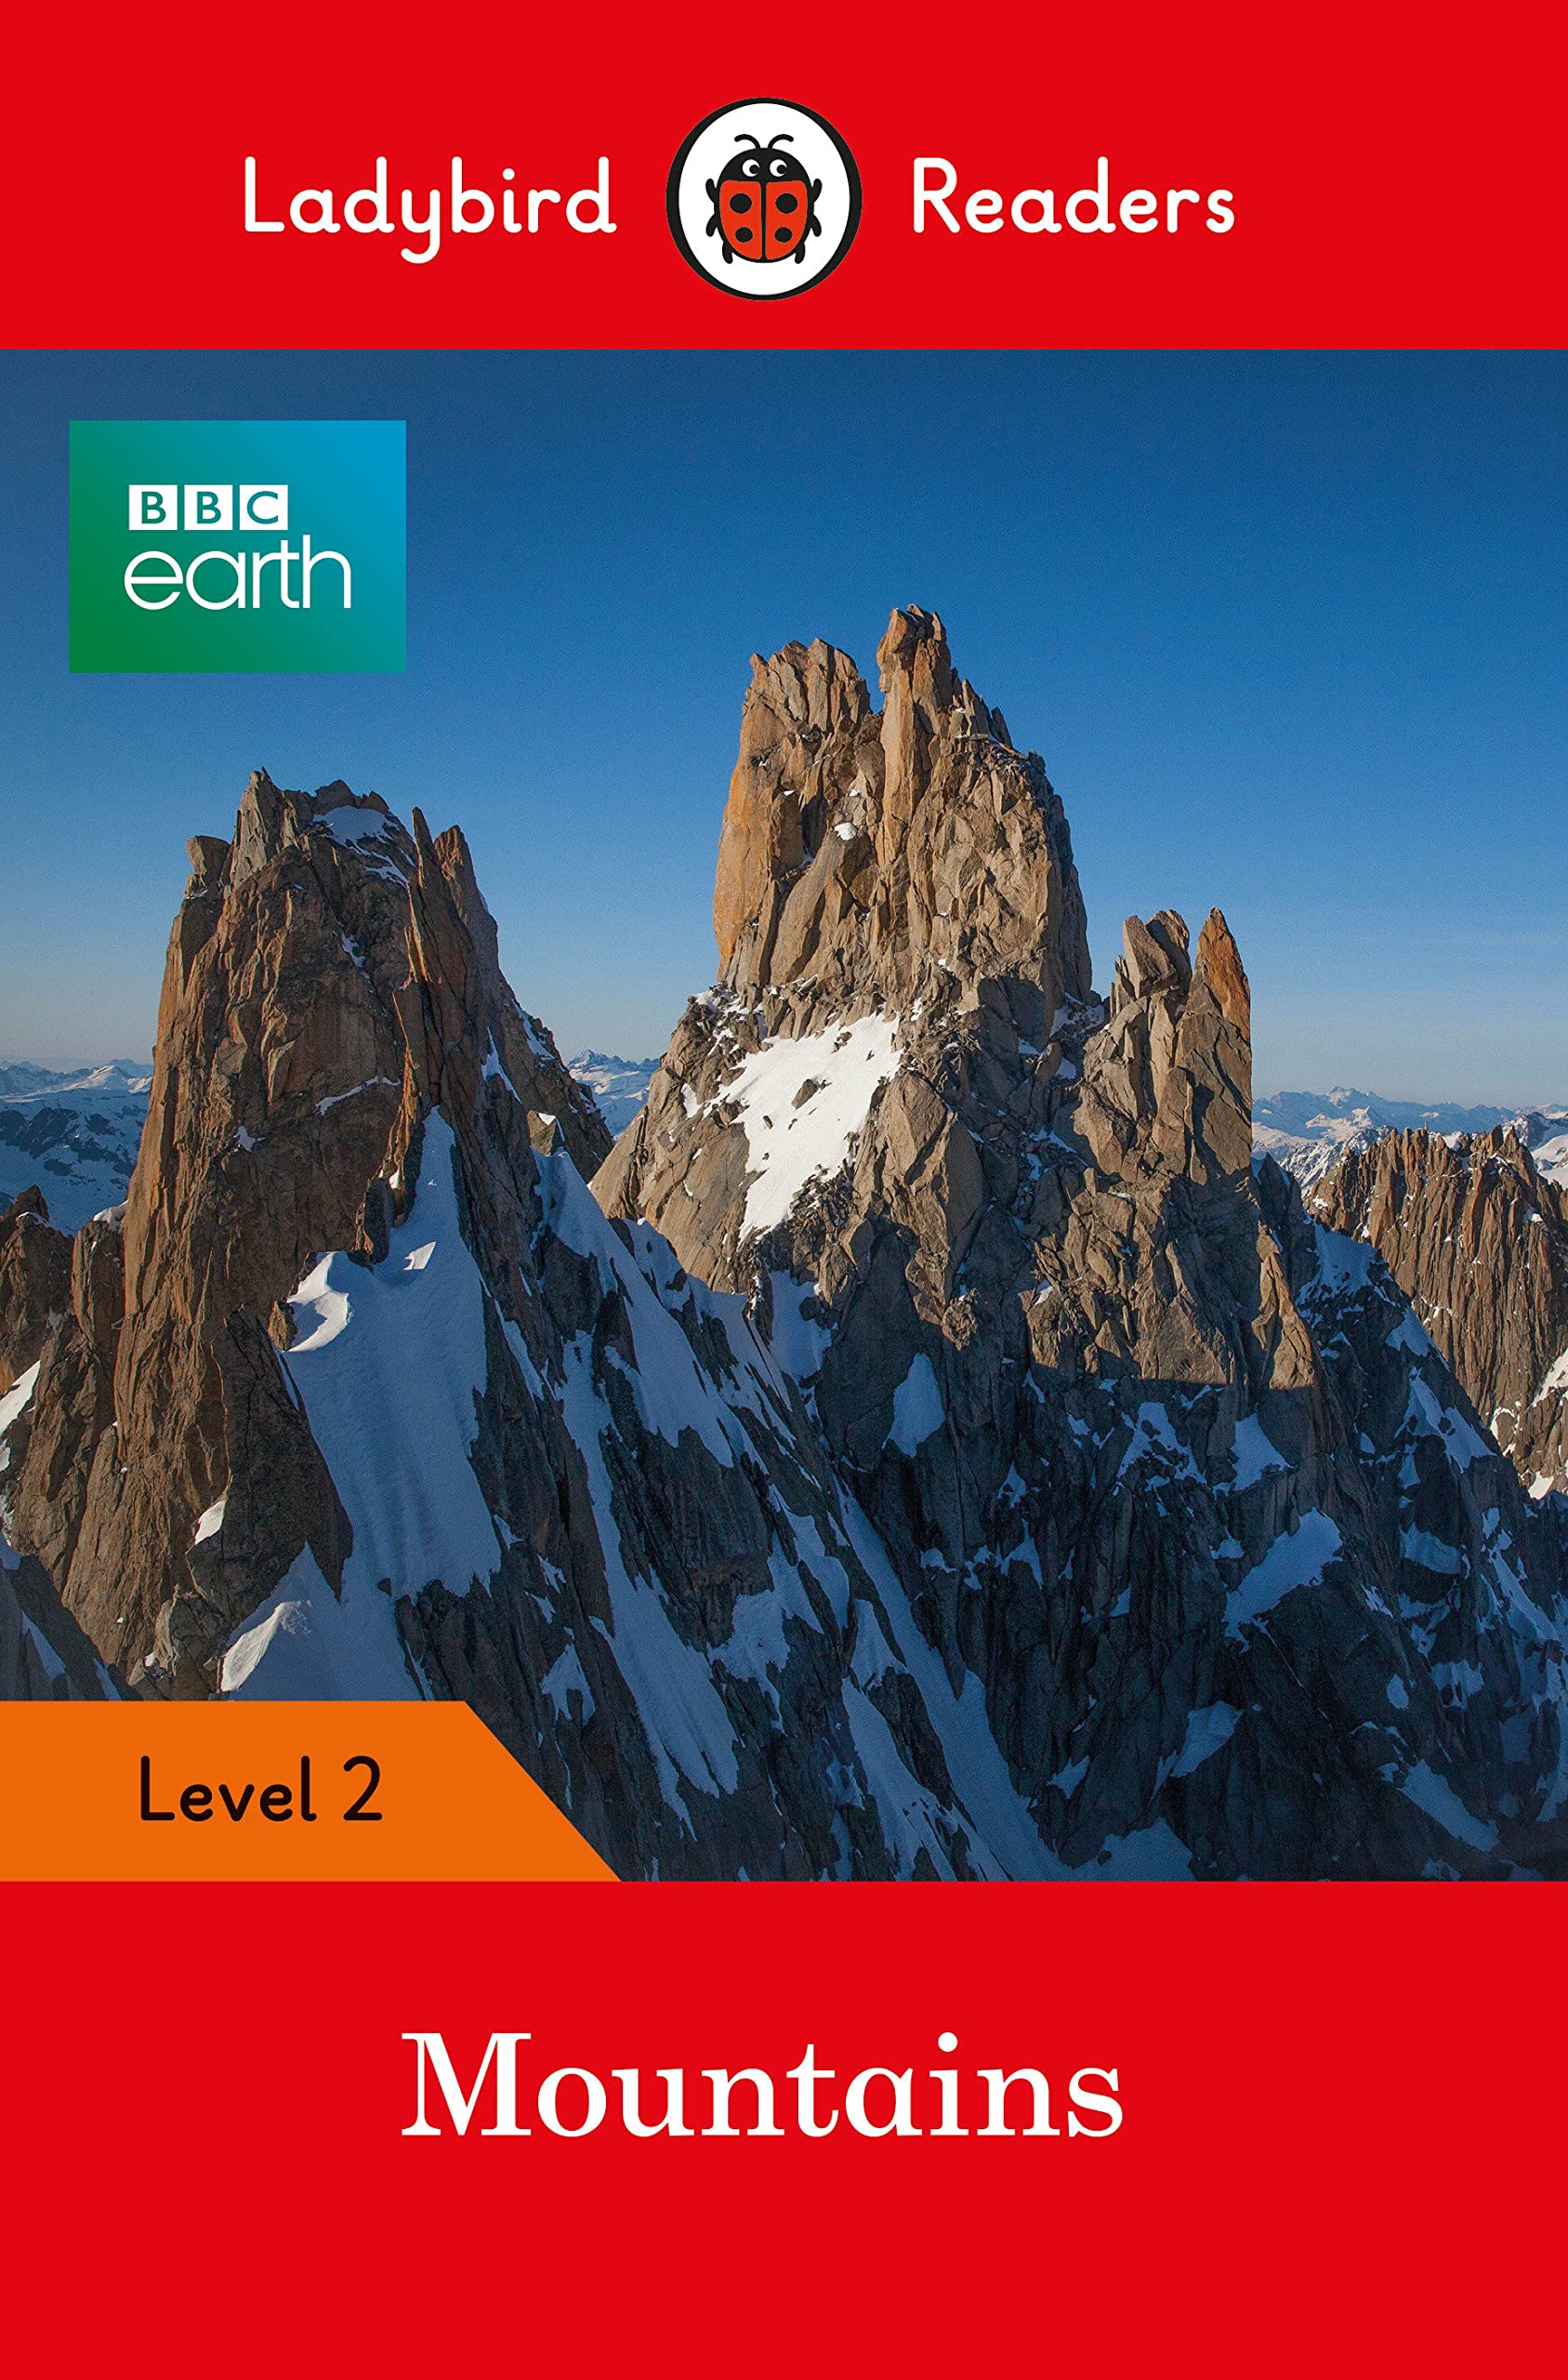 Ladybird Readers Level 2 : BBC Earth - Mountains